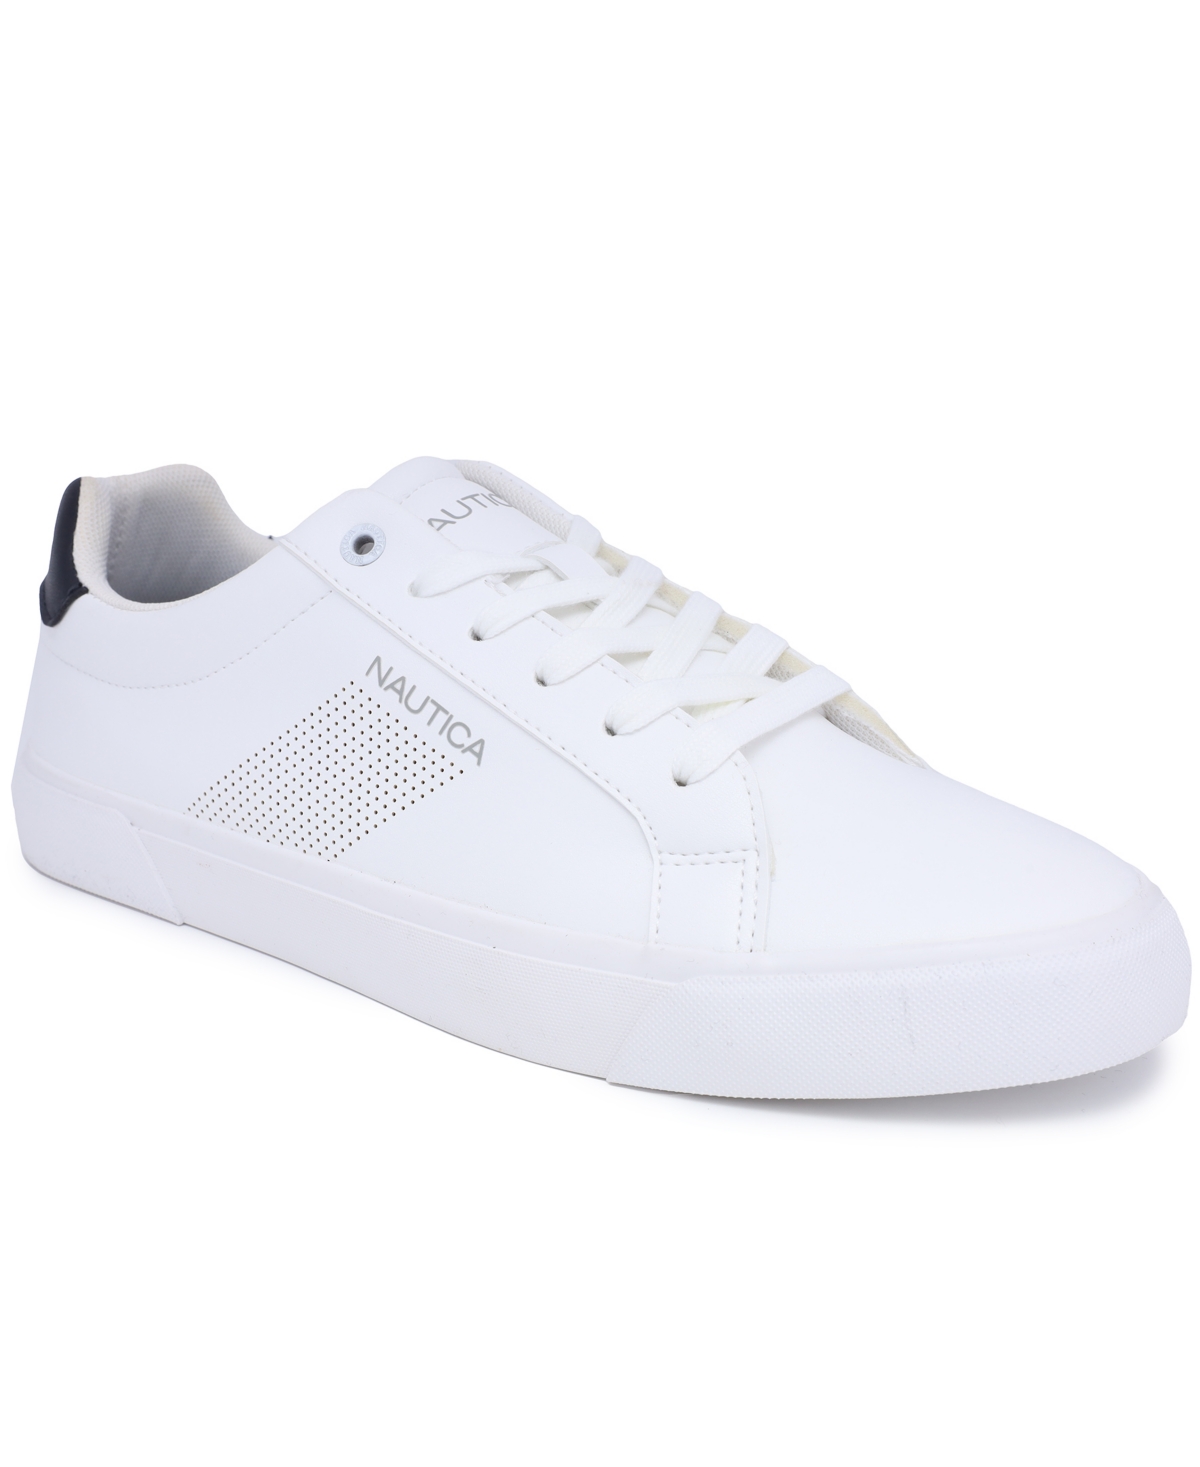 Nautica Men's Colpa Casual Sneakers In White And Blue